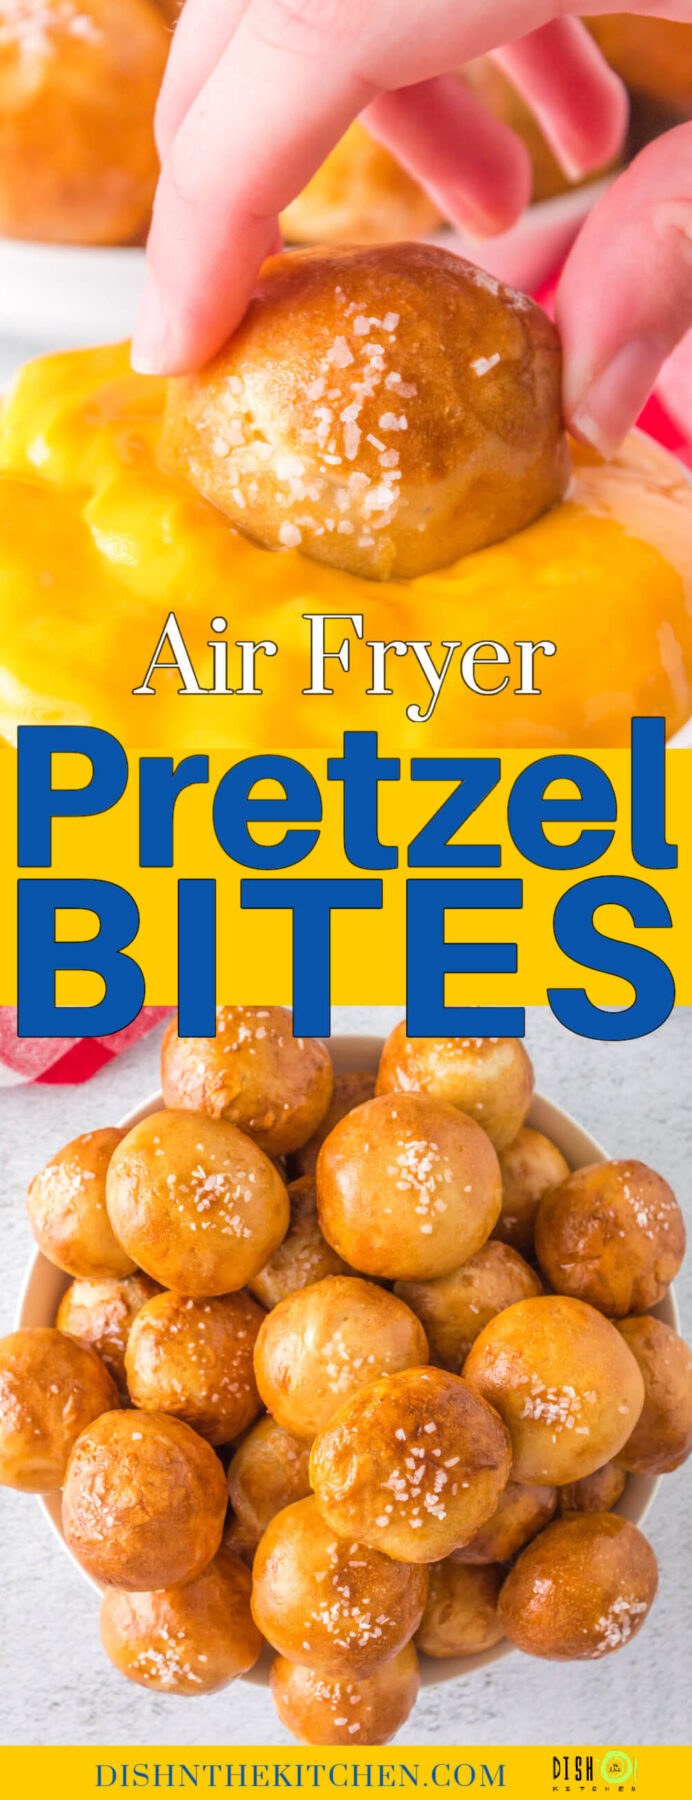 Pinterest image featuring golden baked pretzel bites in a pile and in a yellow mustard dip.